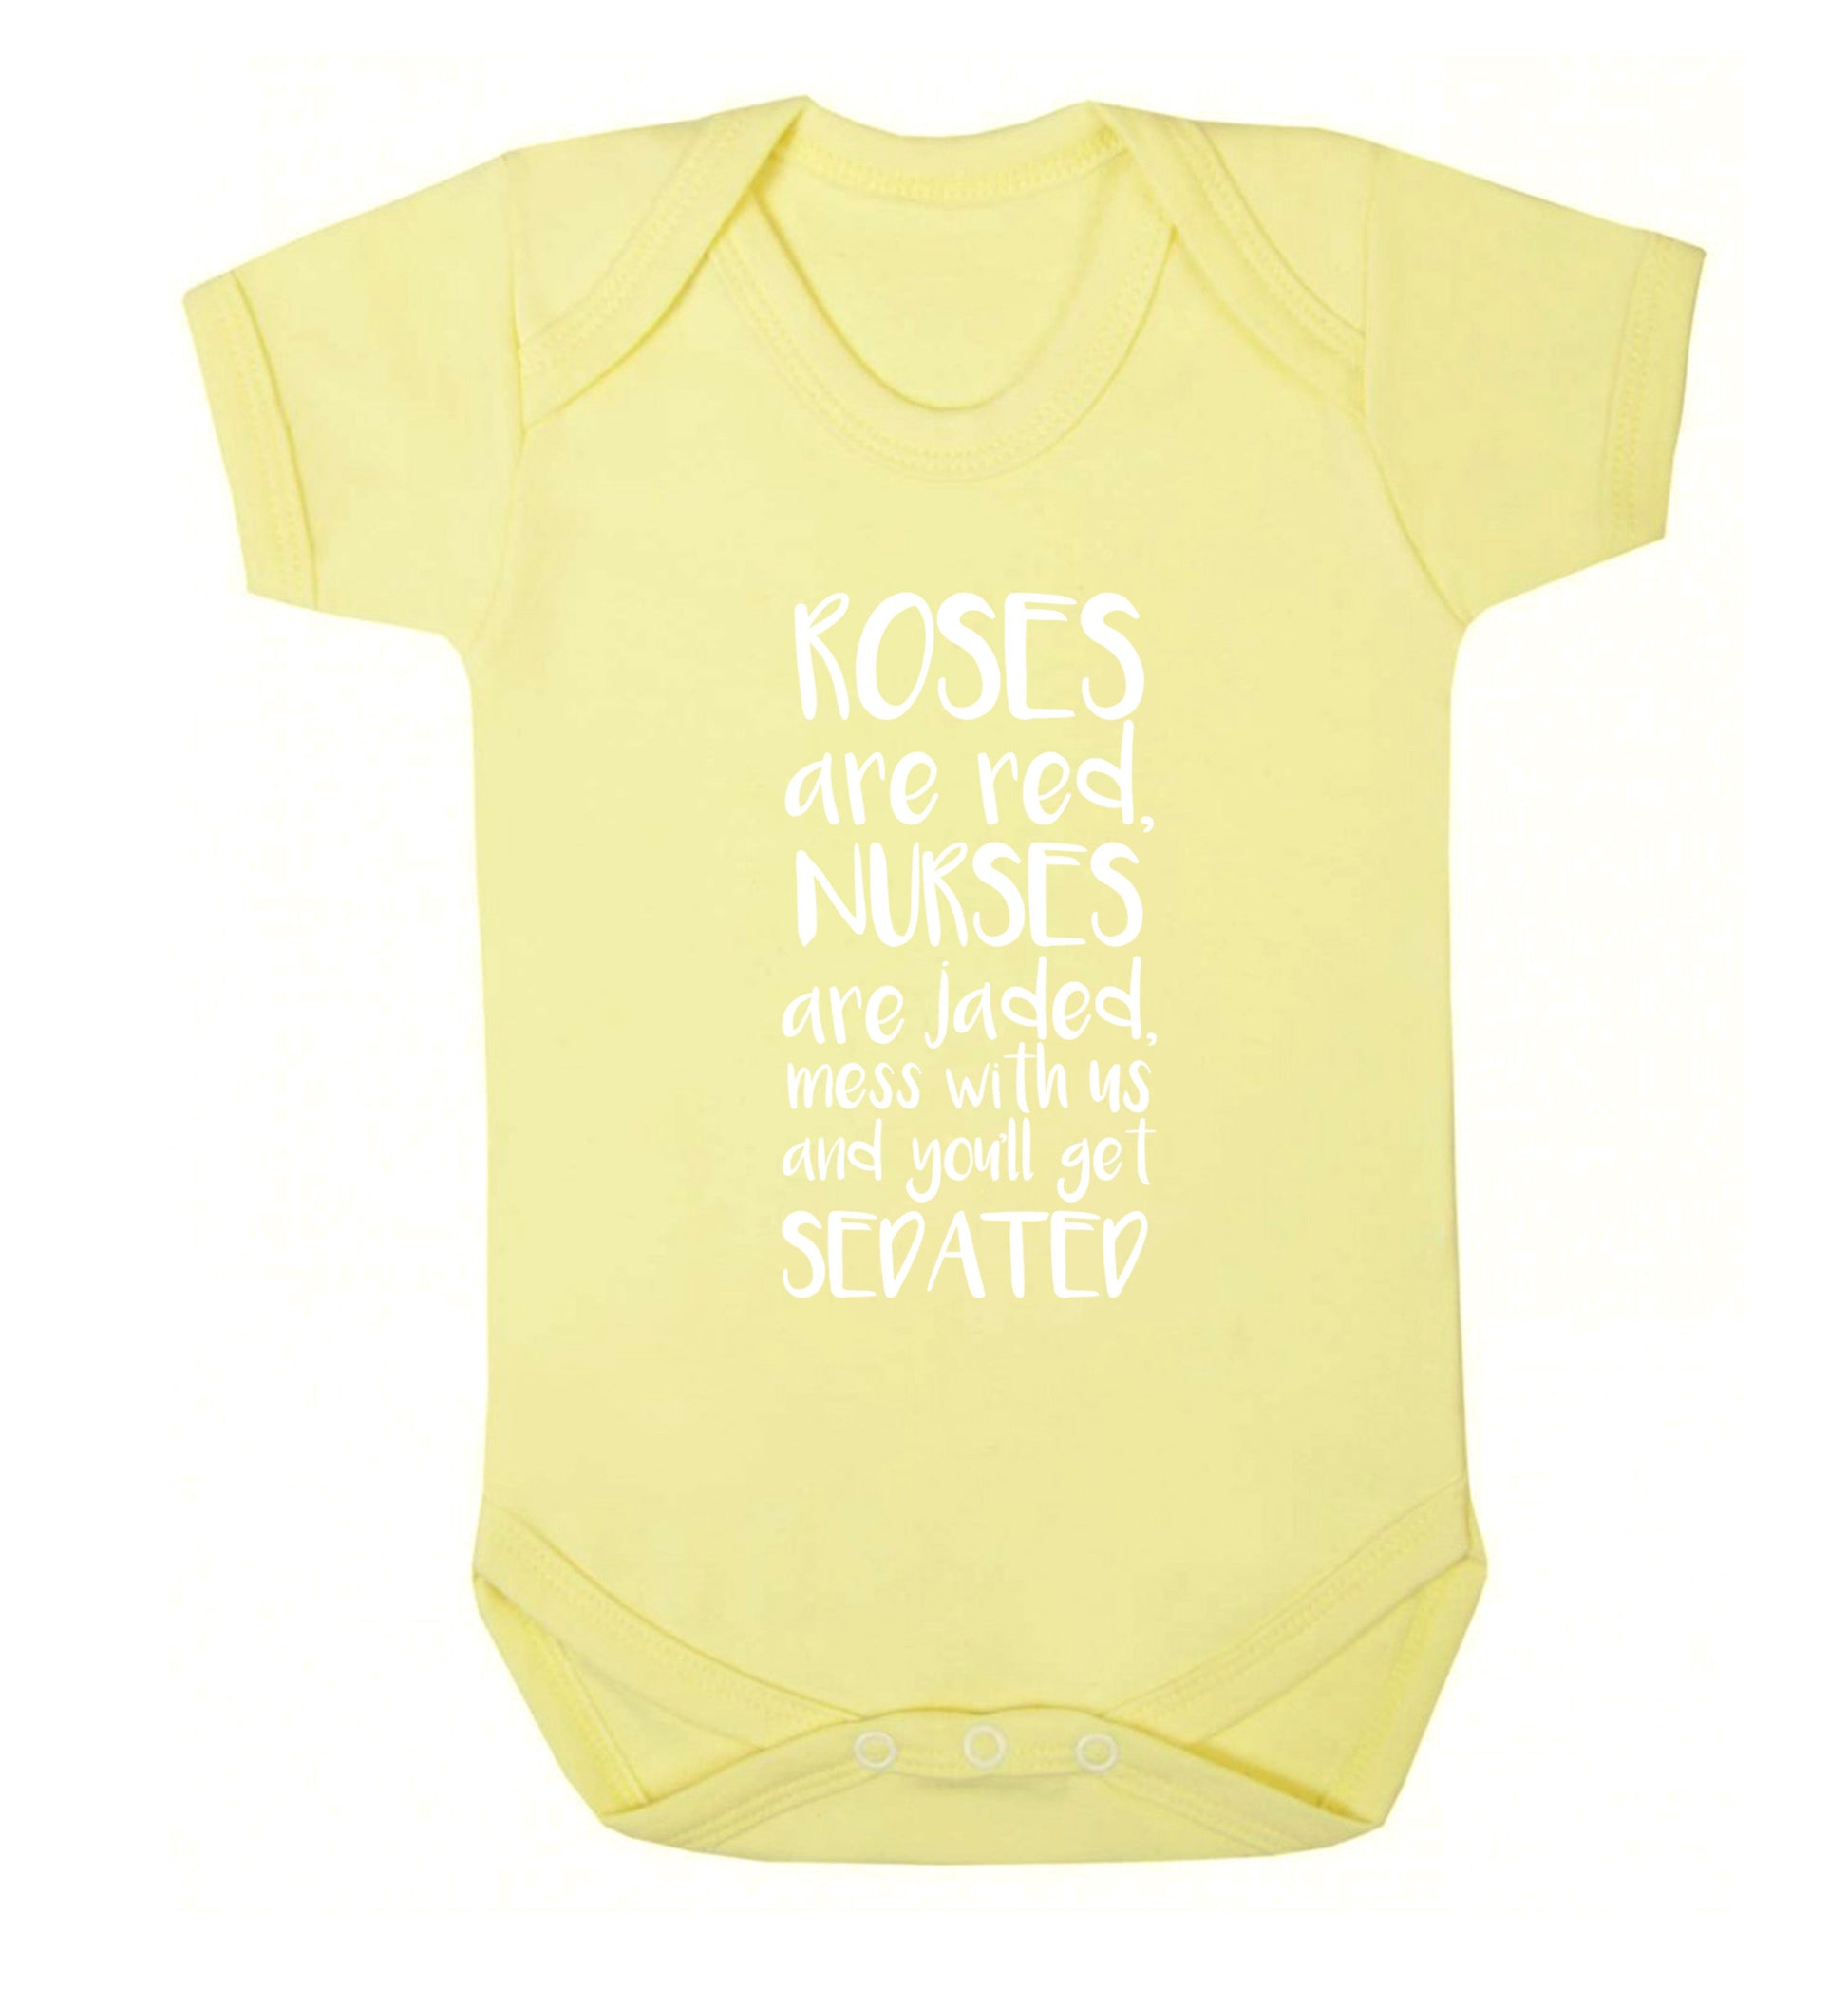 Roses are red, nurses are jaded, mess with us and you'll get sedated Baby Vest pale yellow 18-24 months